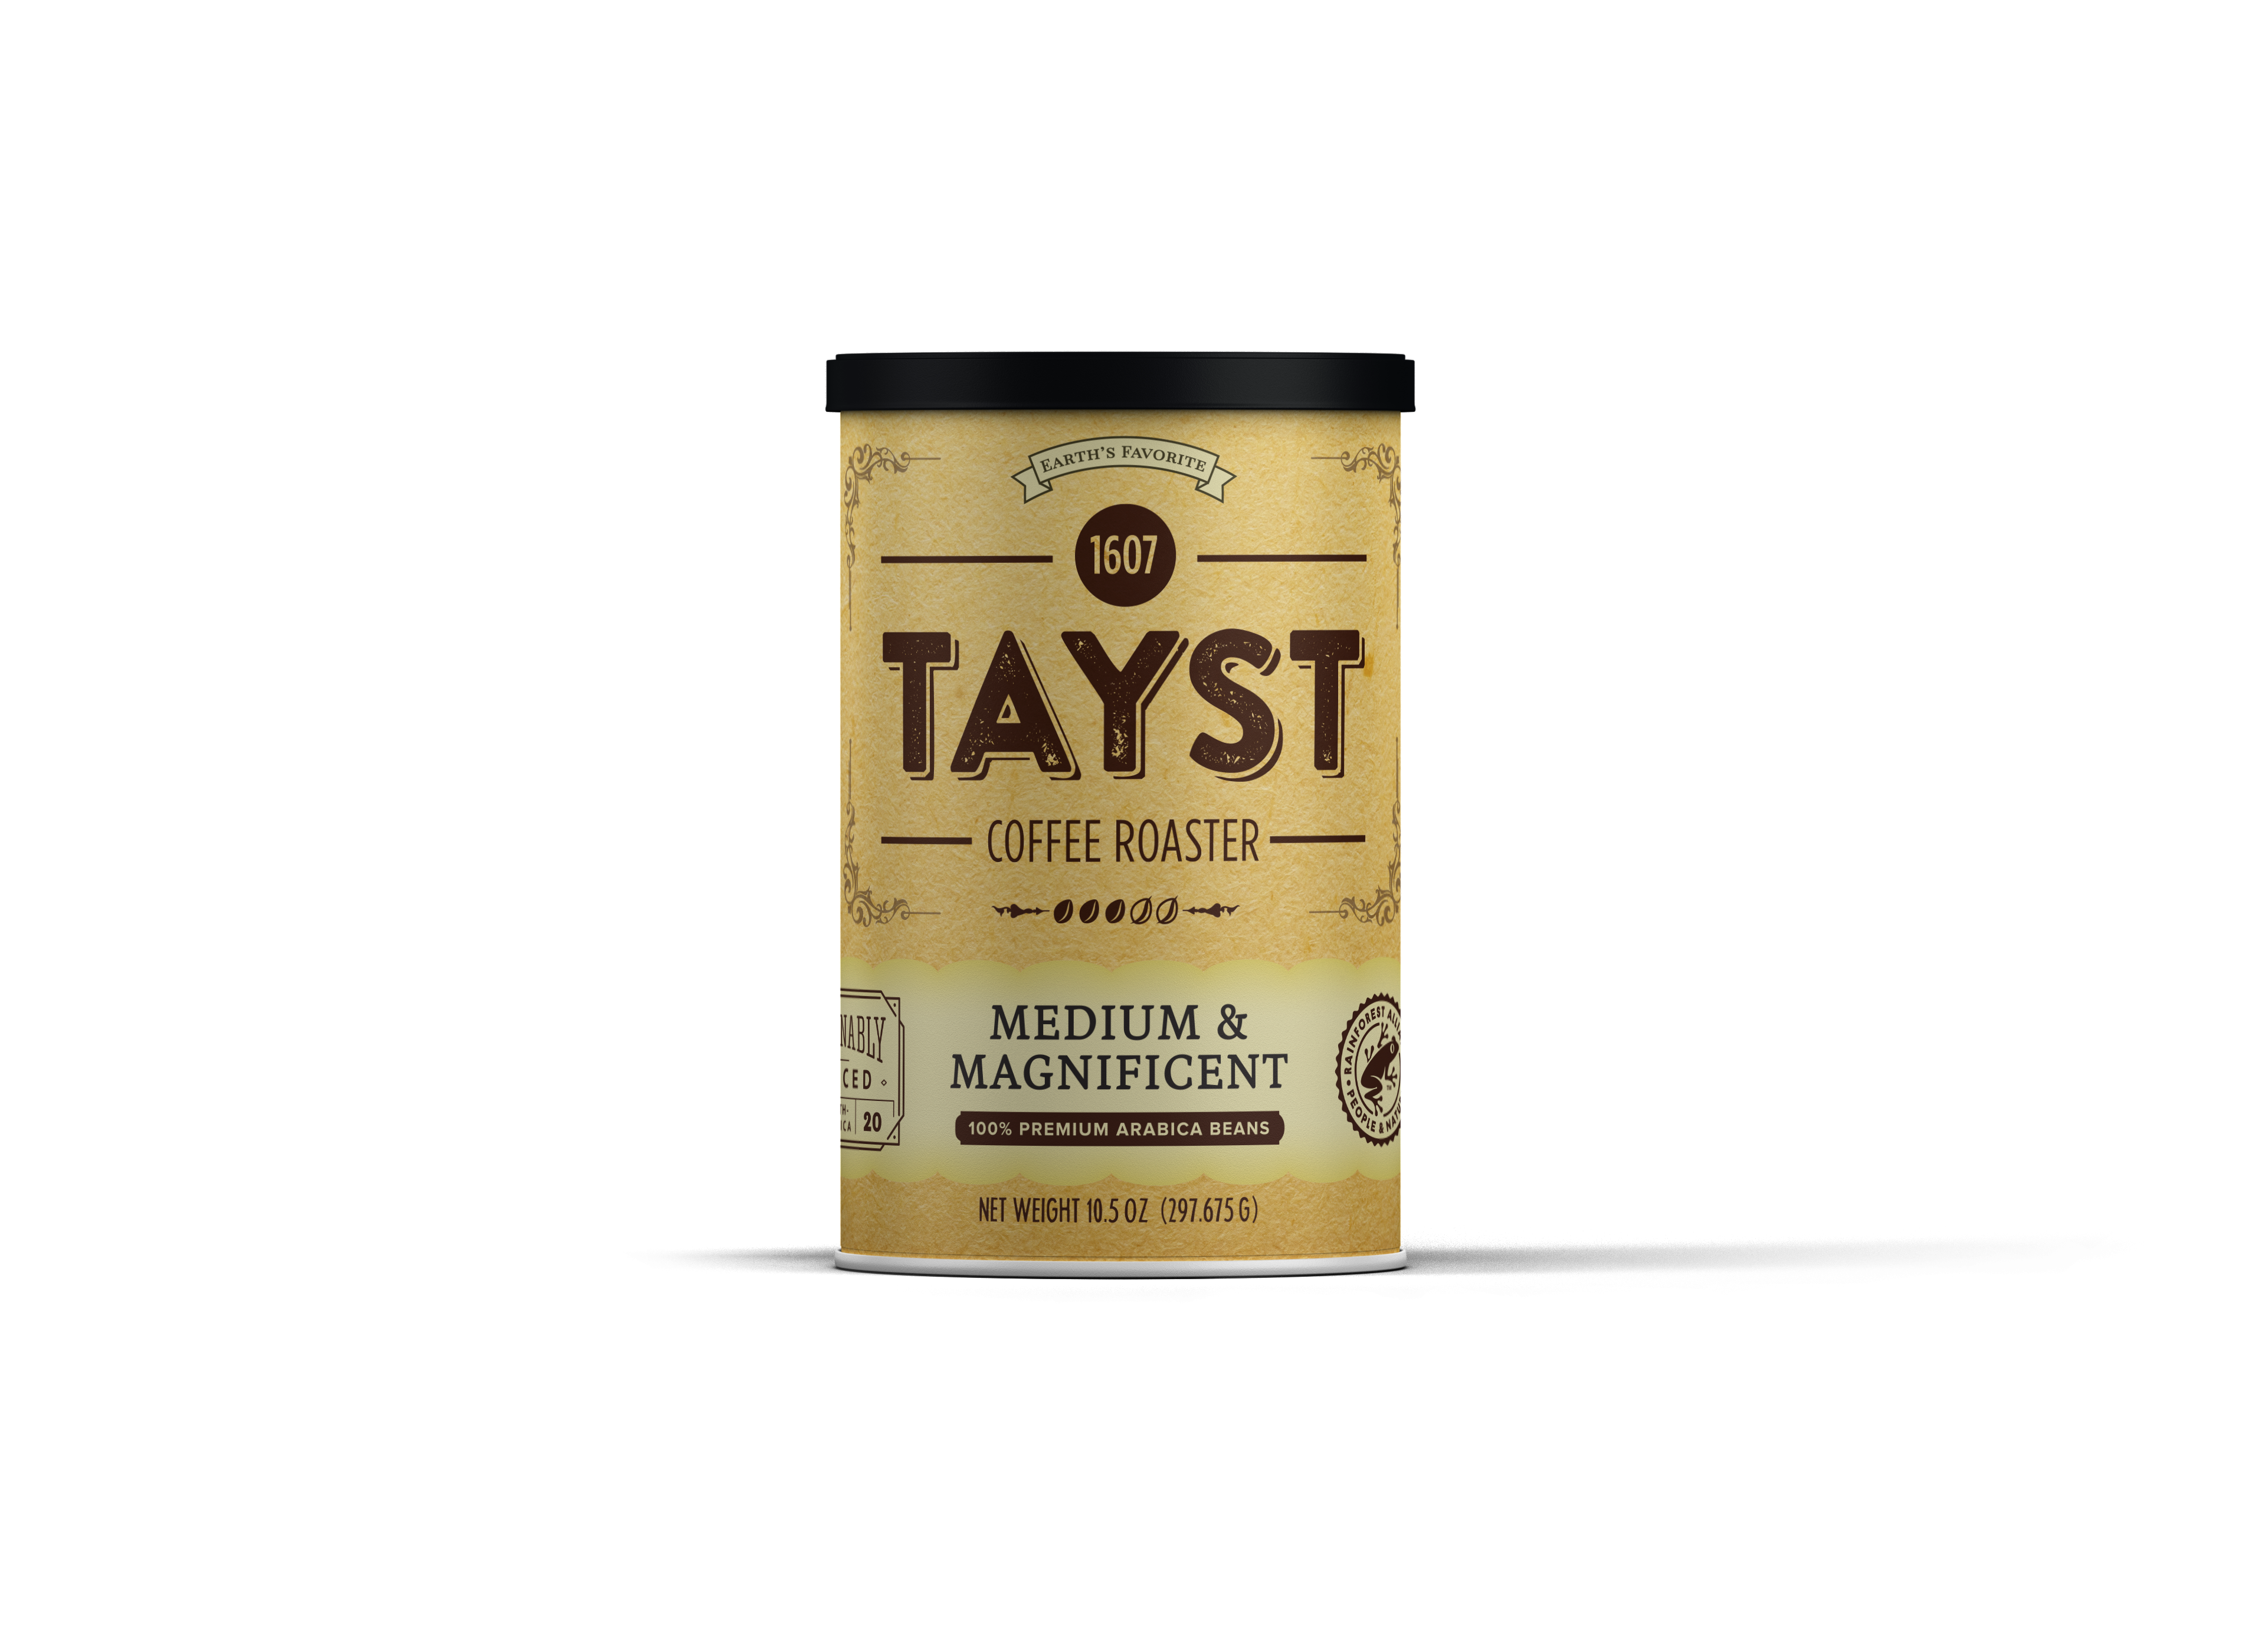 Tayst coffee can - medium and magnificent